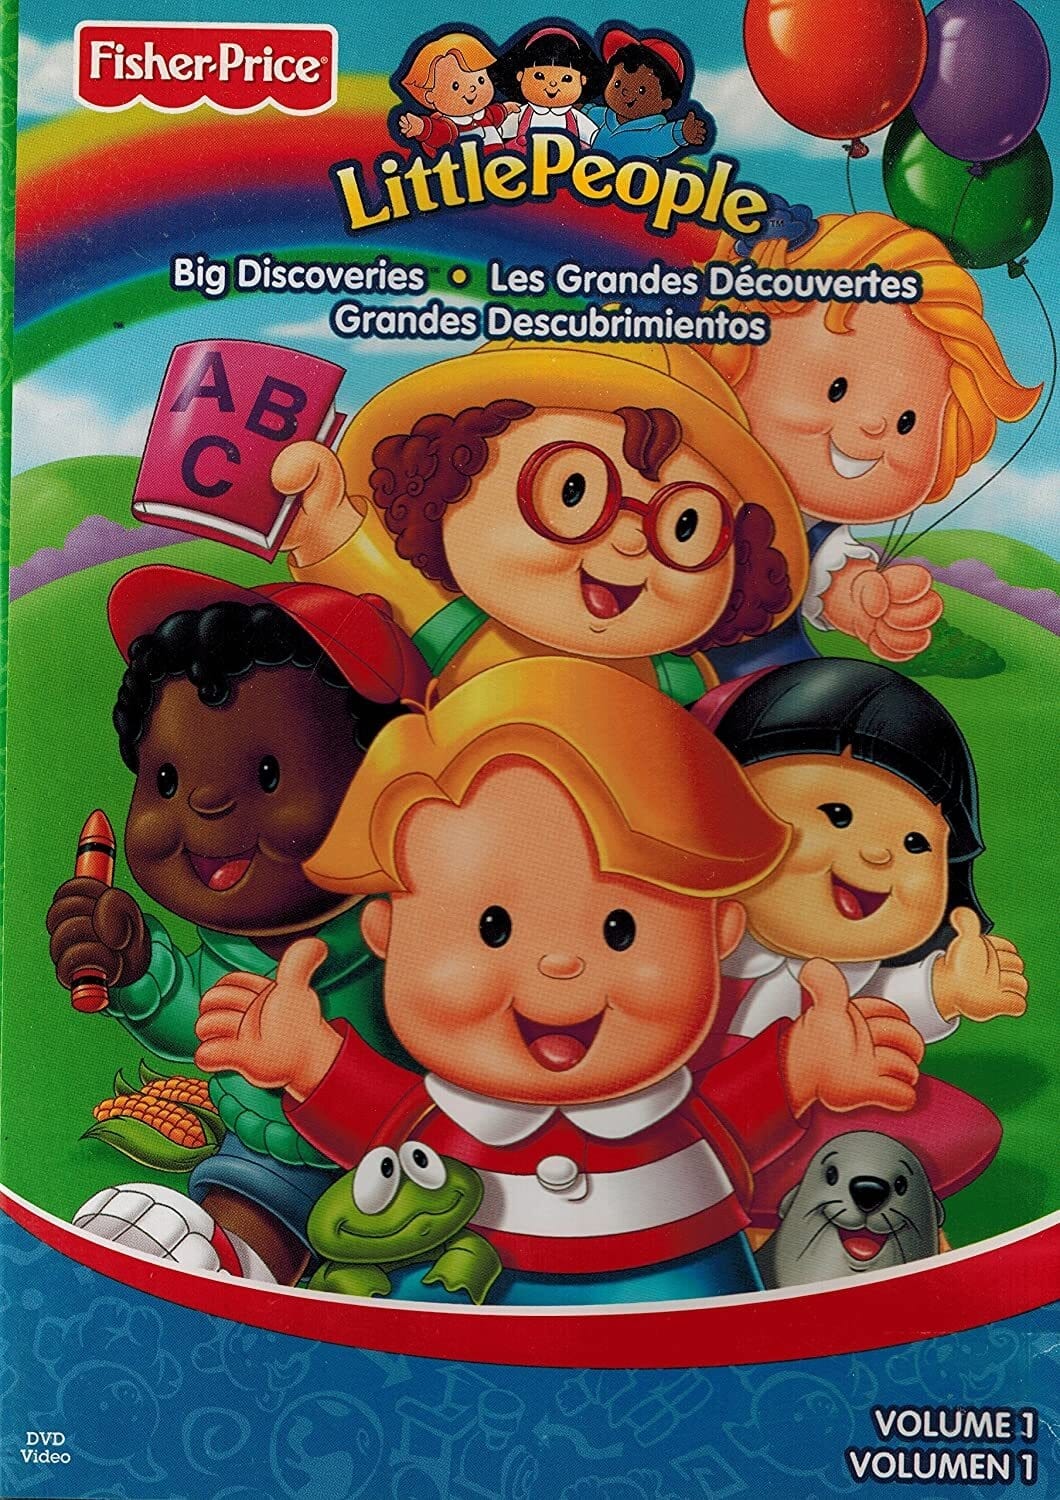 Little People TV Shows About Based On Toy